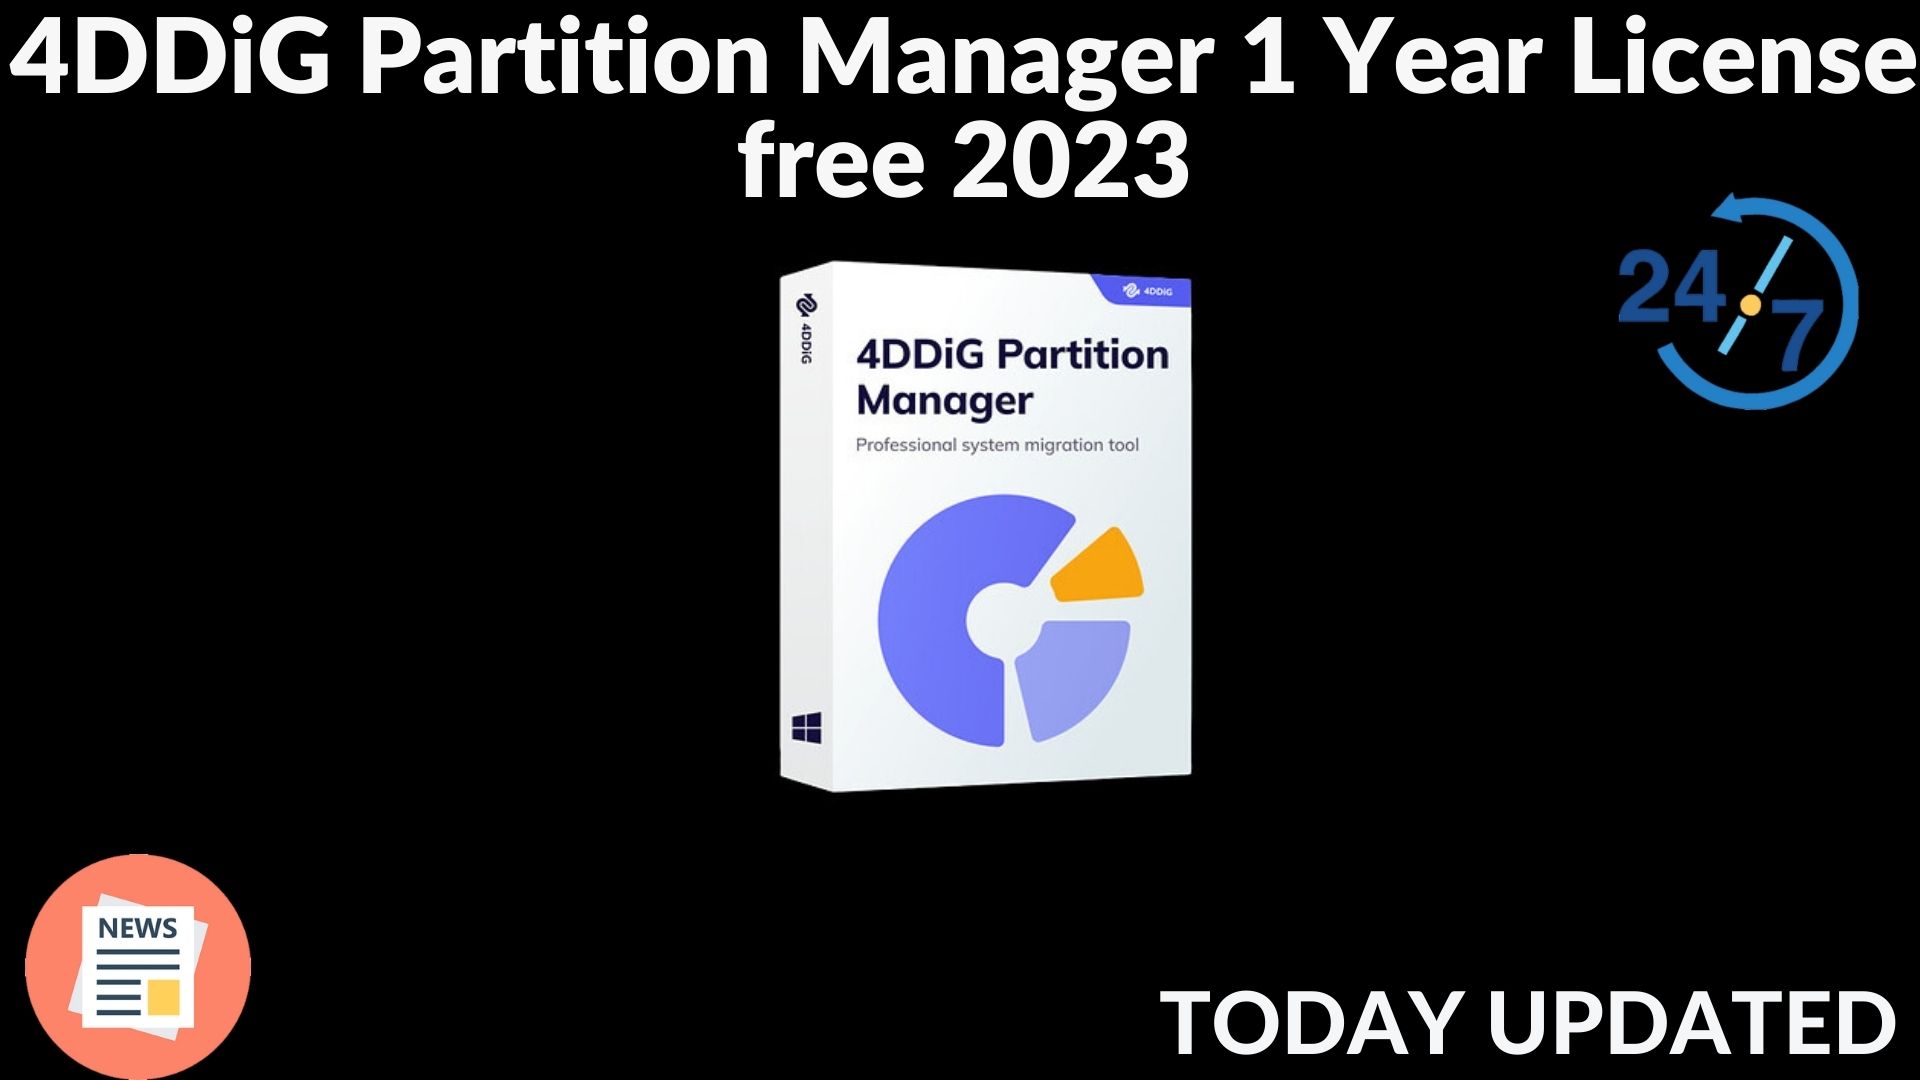 4ddig partition manager 1 year license free 2023